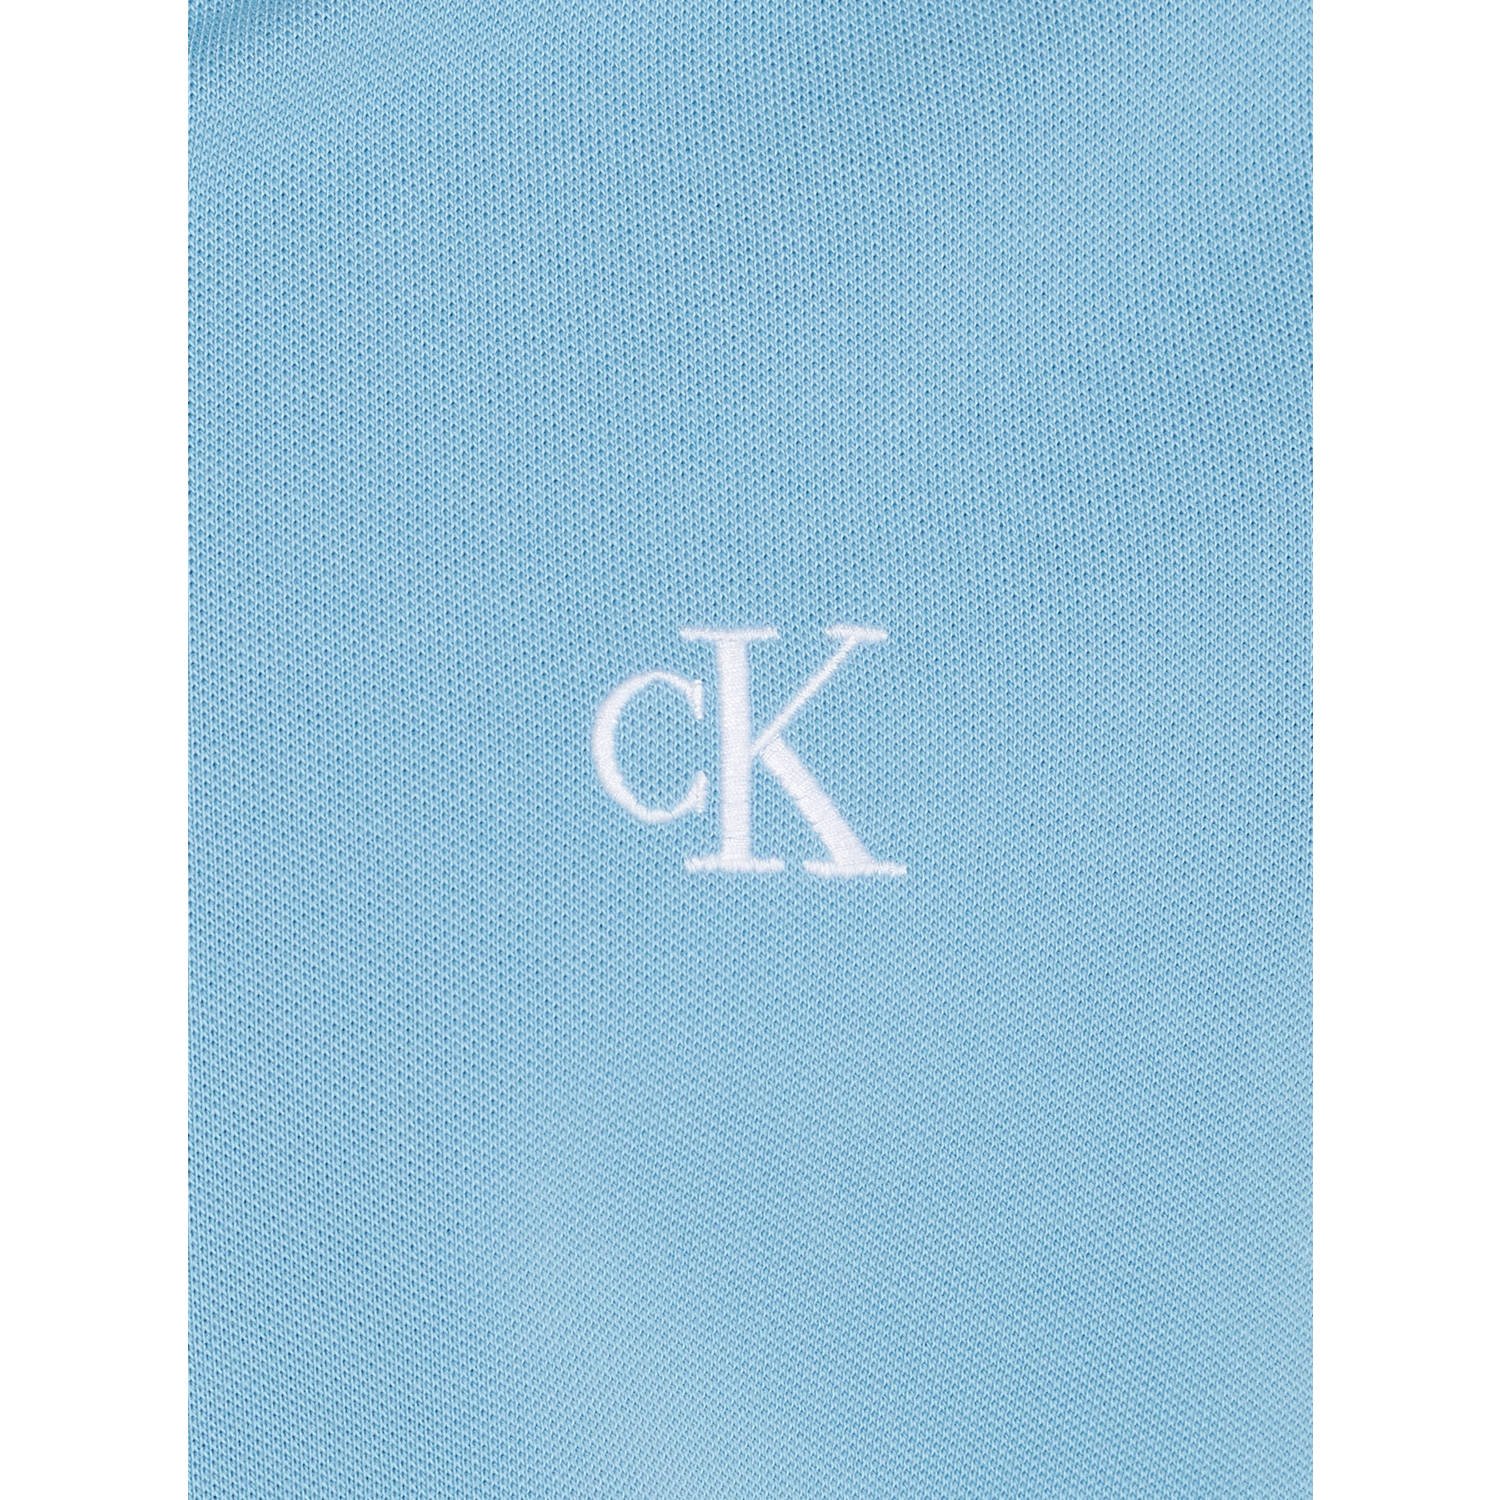 CALVIN KLEIN JEANS slim fit polo TIPPING Dusk Blue